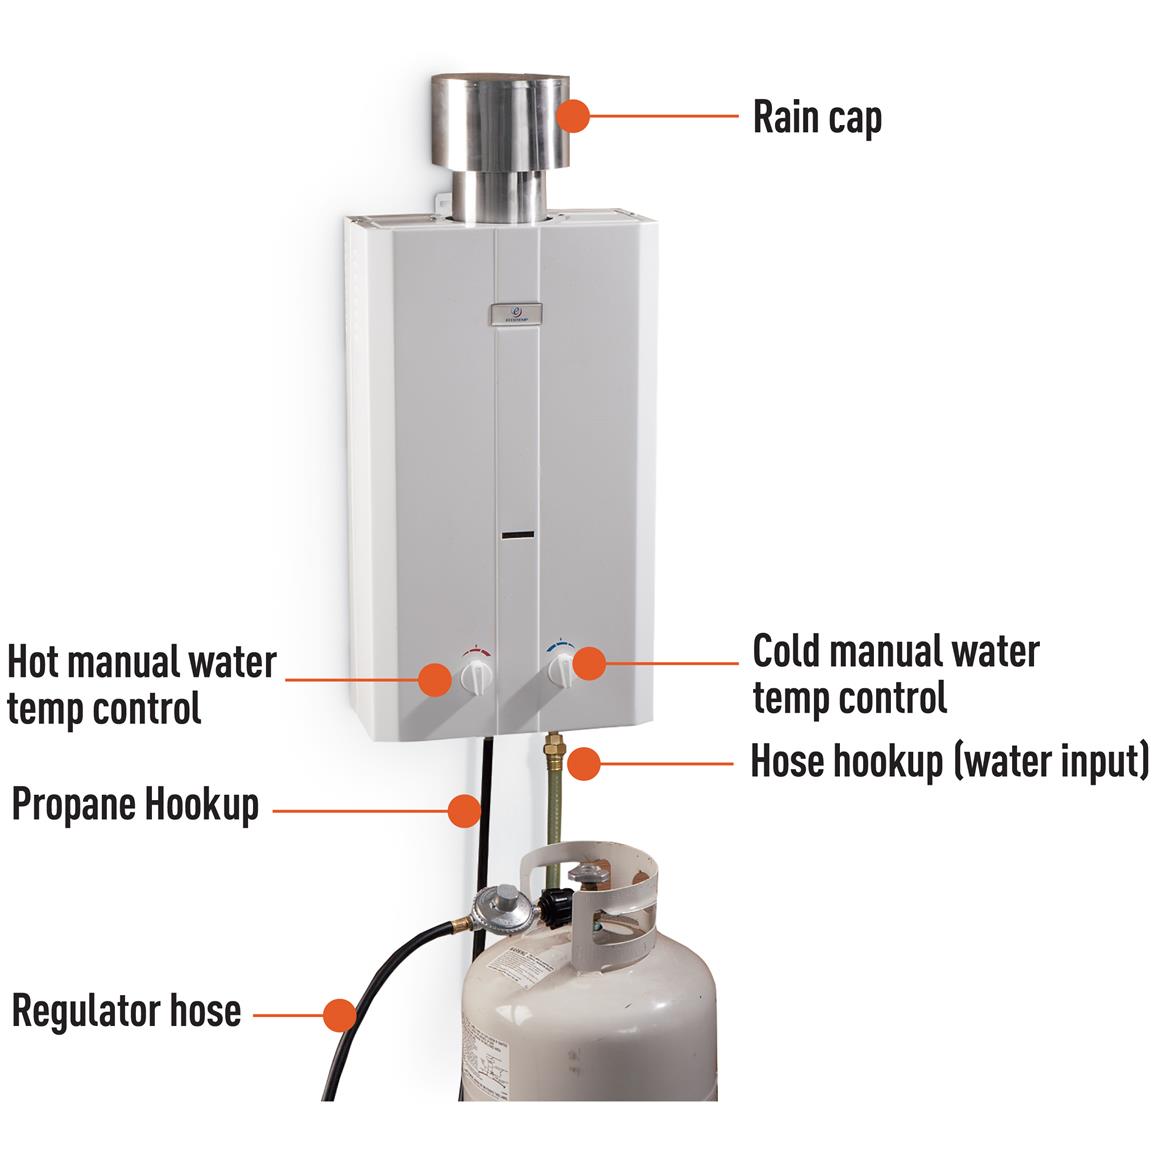 Eccotemp L10 Portable Outdoor Tankless Water Heater - 145247, Portable